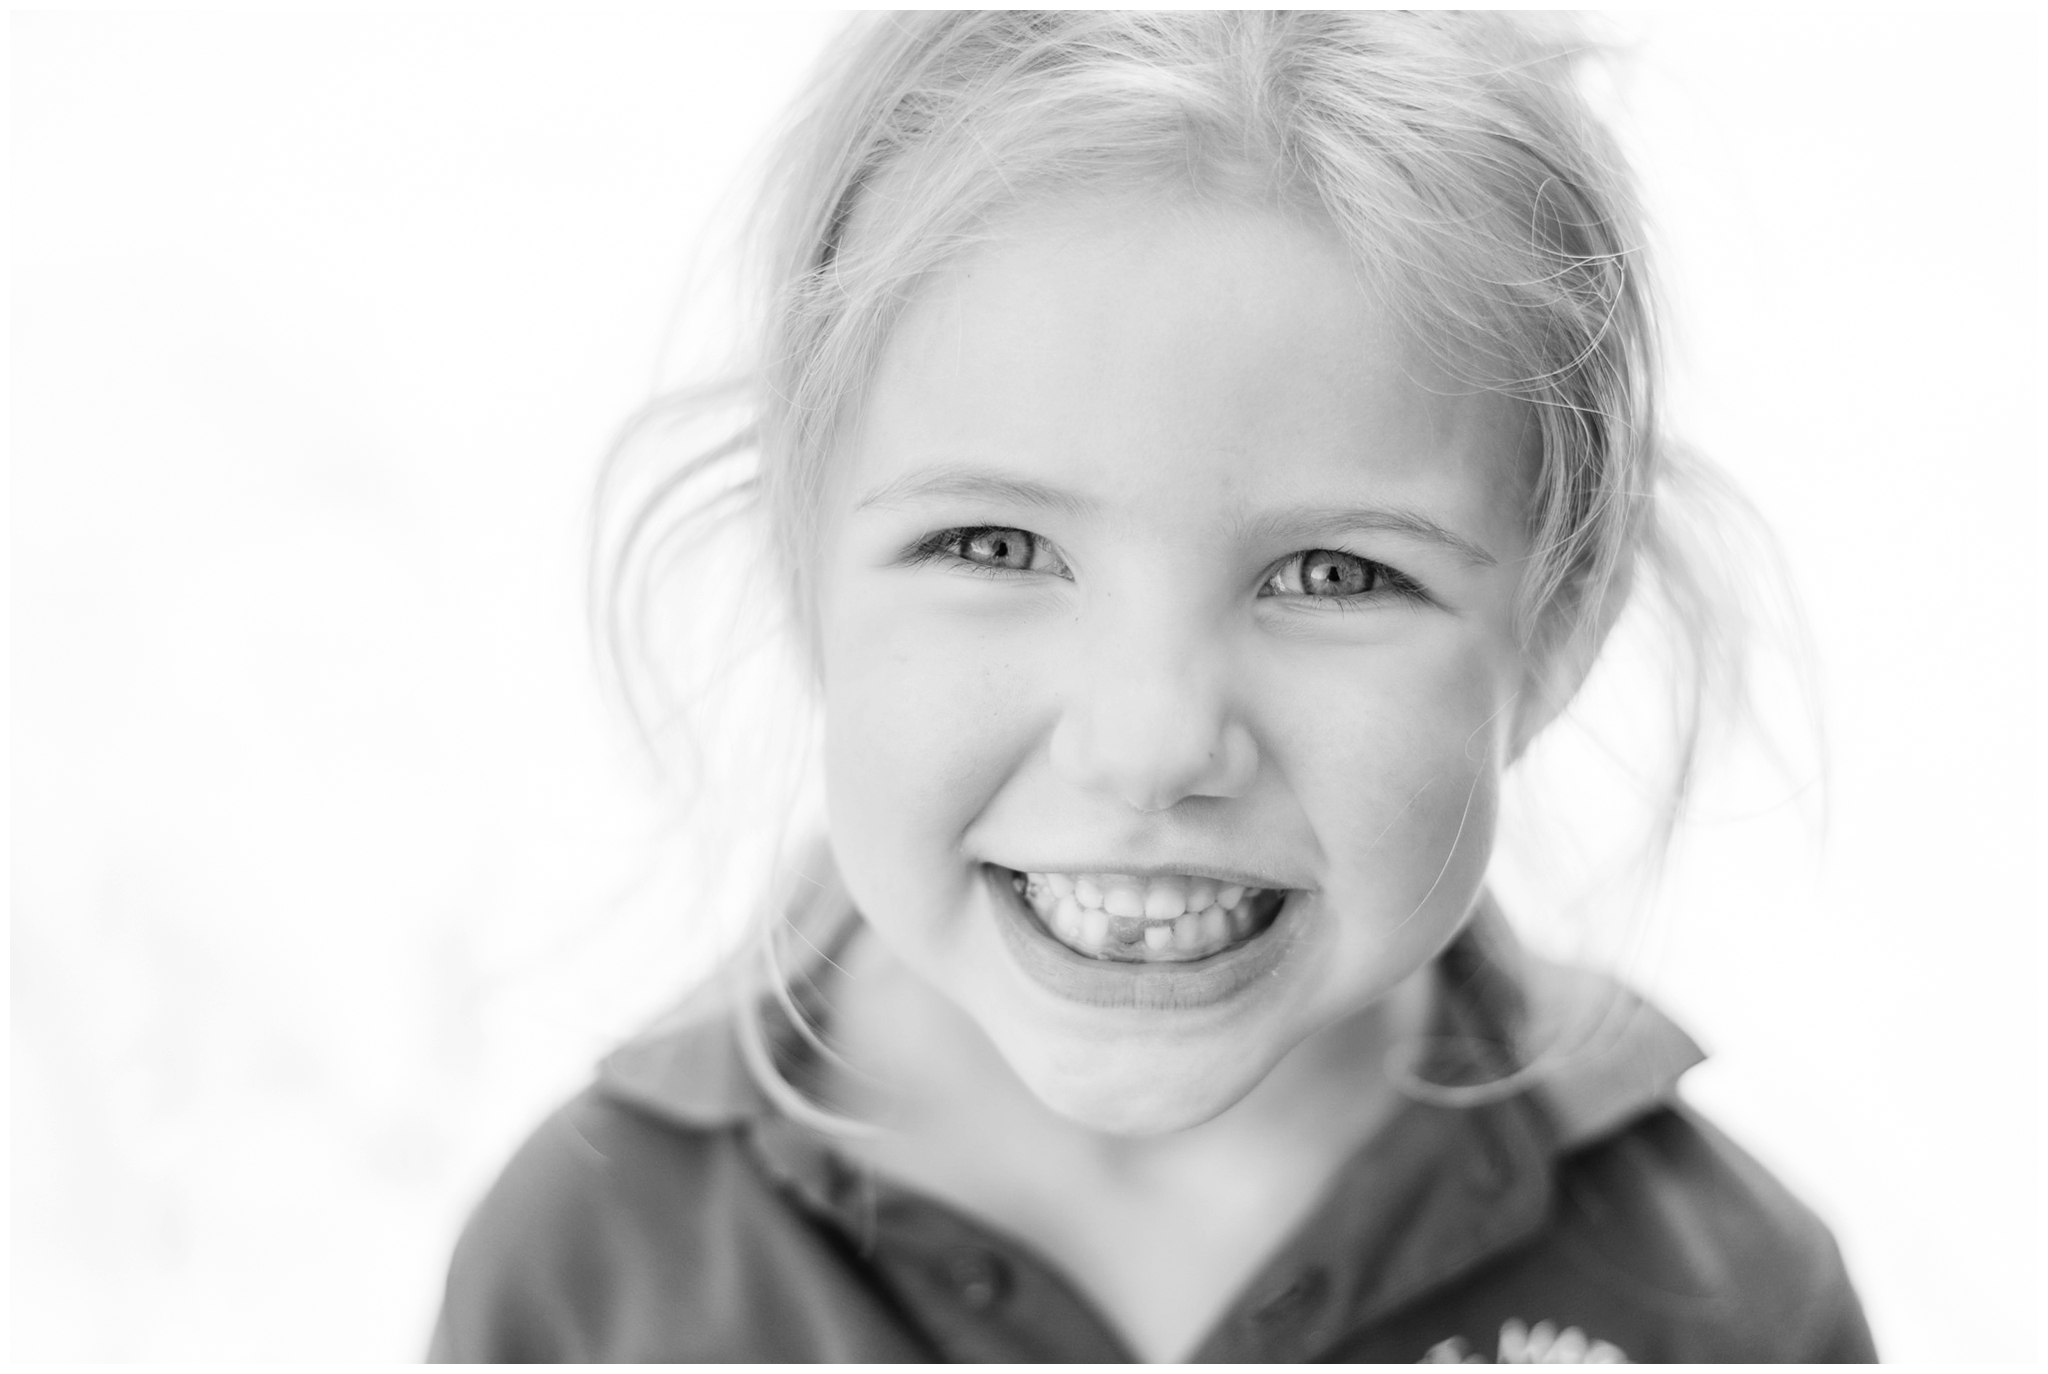 Kingwood photographer - daughter's first lost tooth